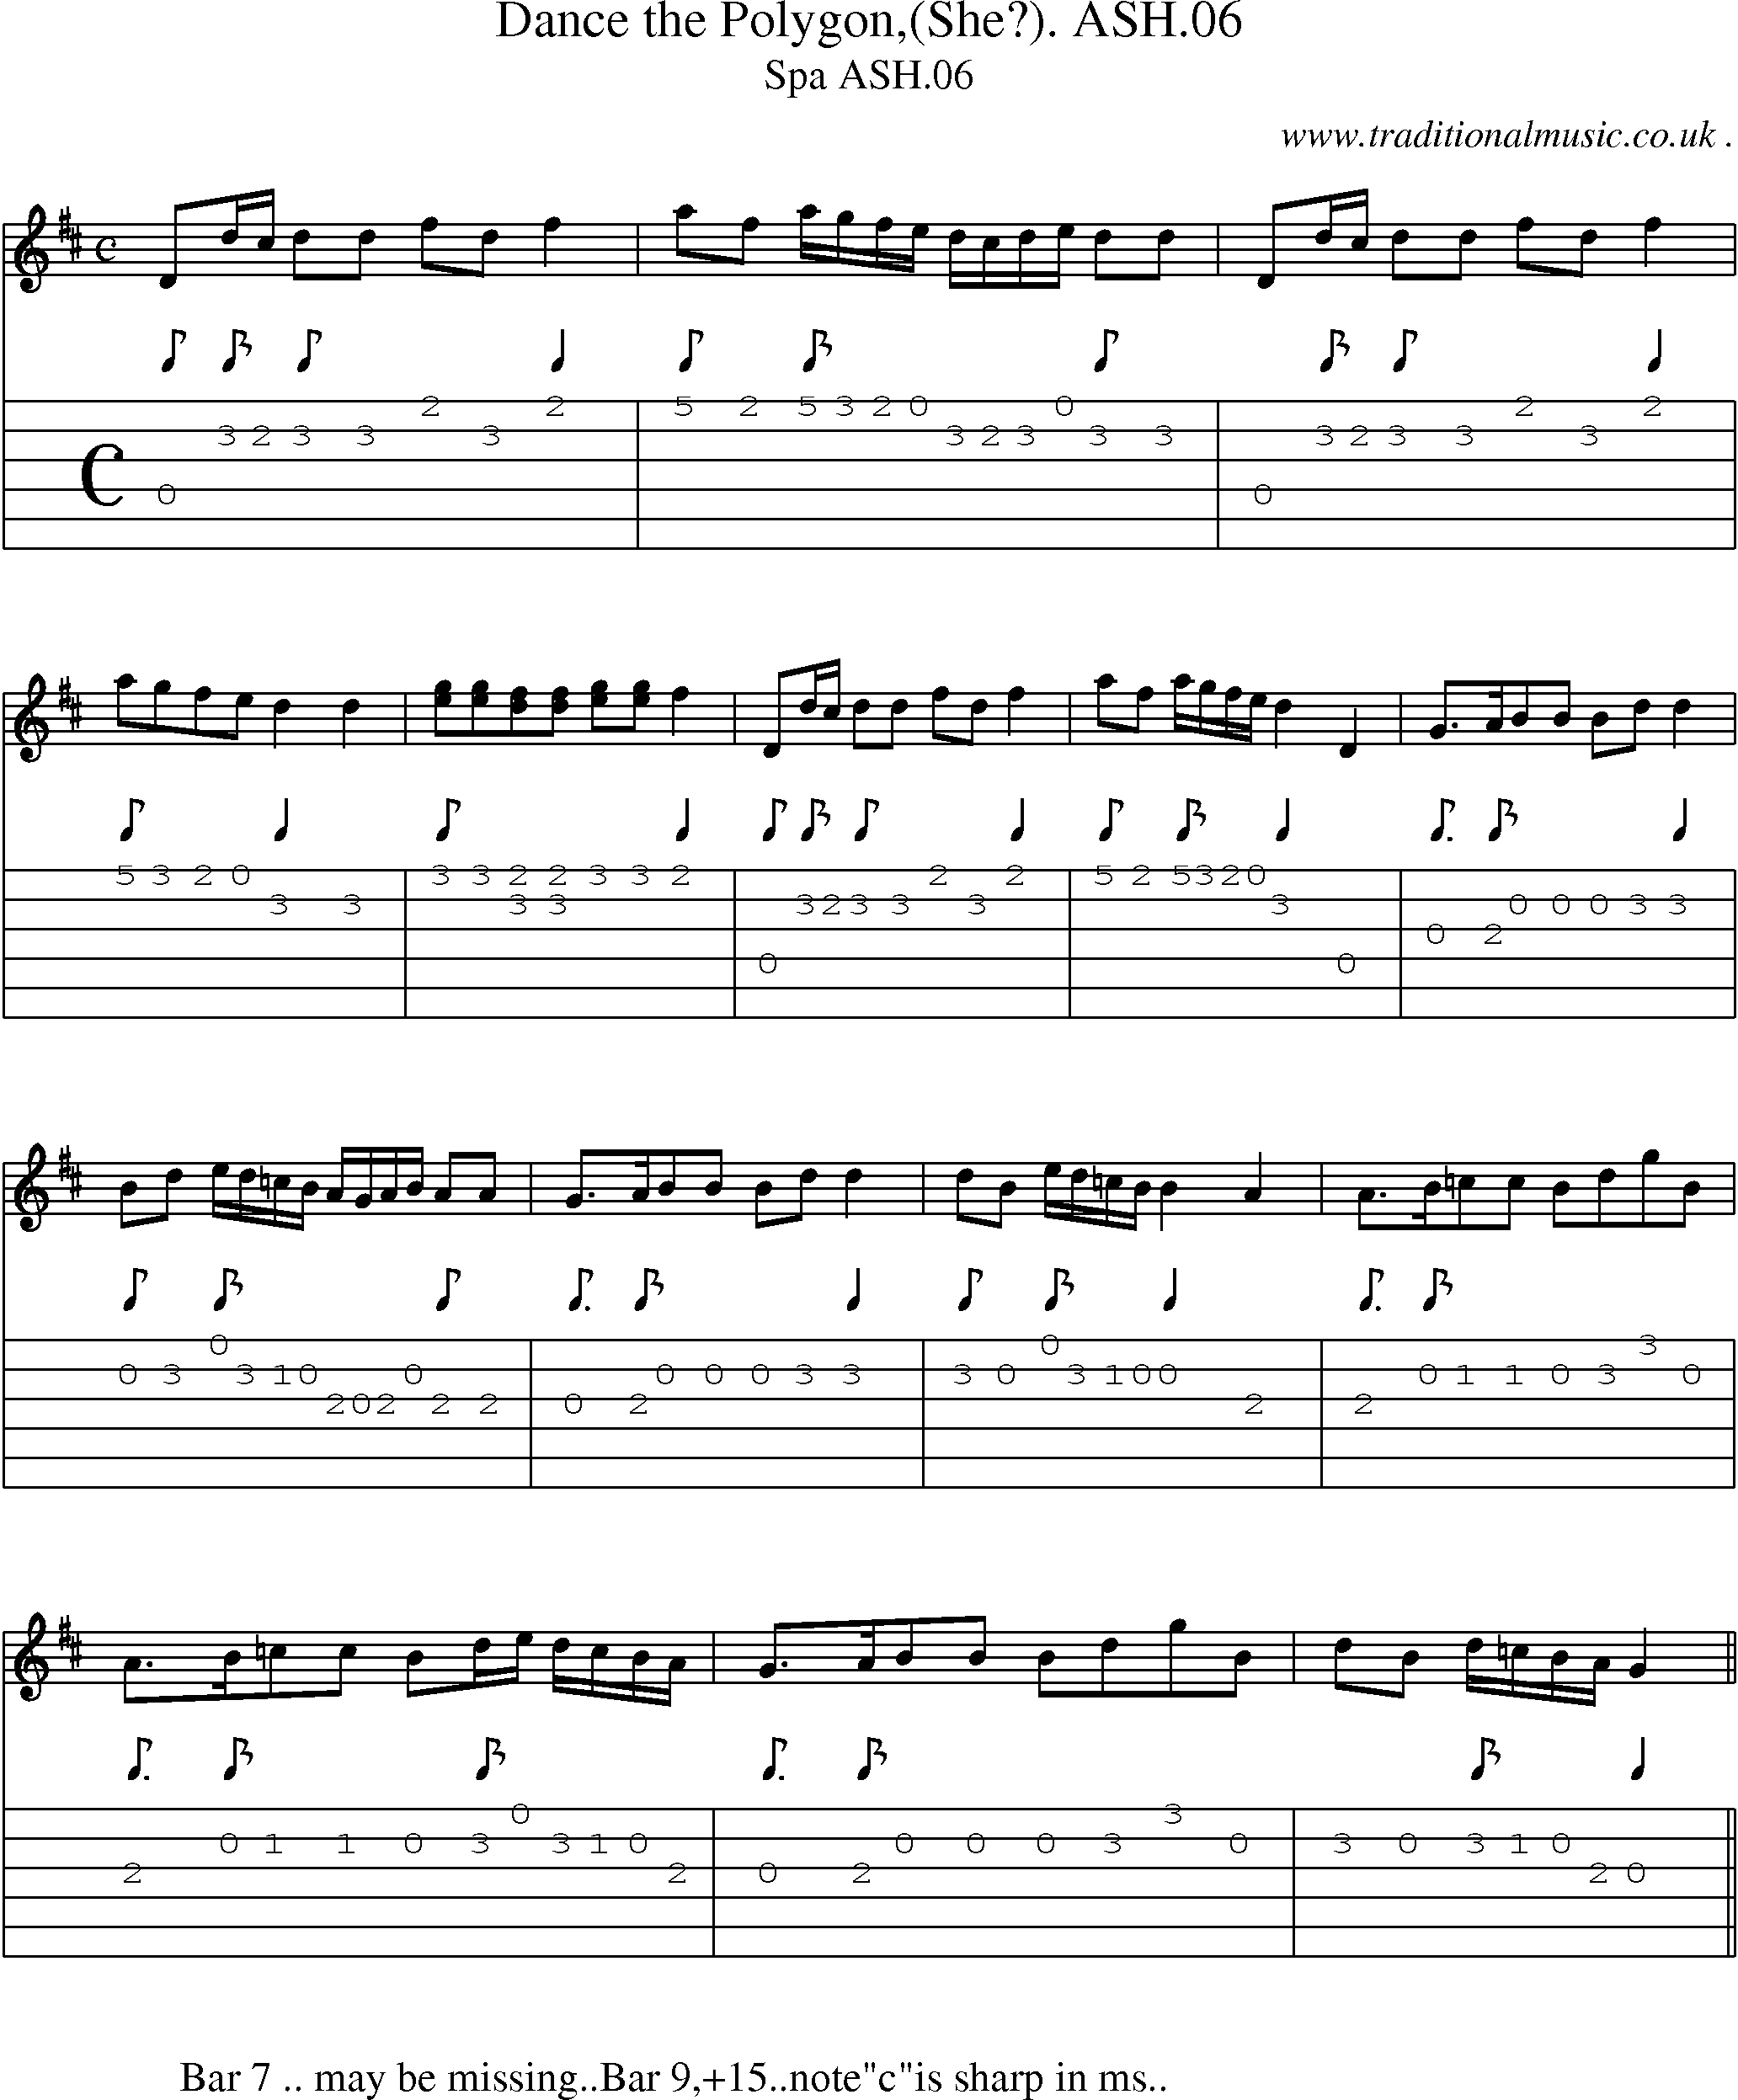 Sheet-Music and Guitar Tabs for Dance The Polygon(she) Ash06